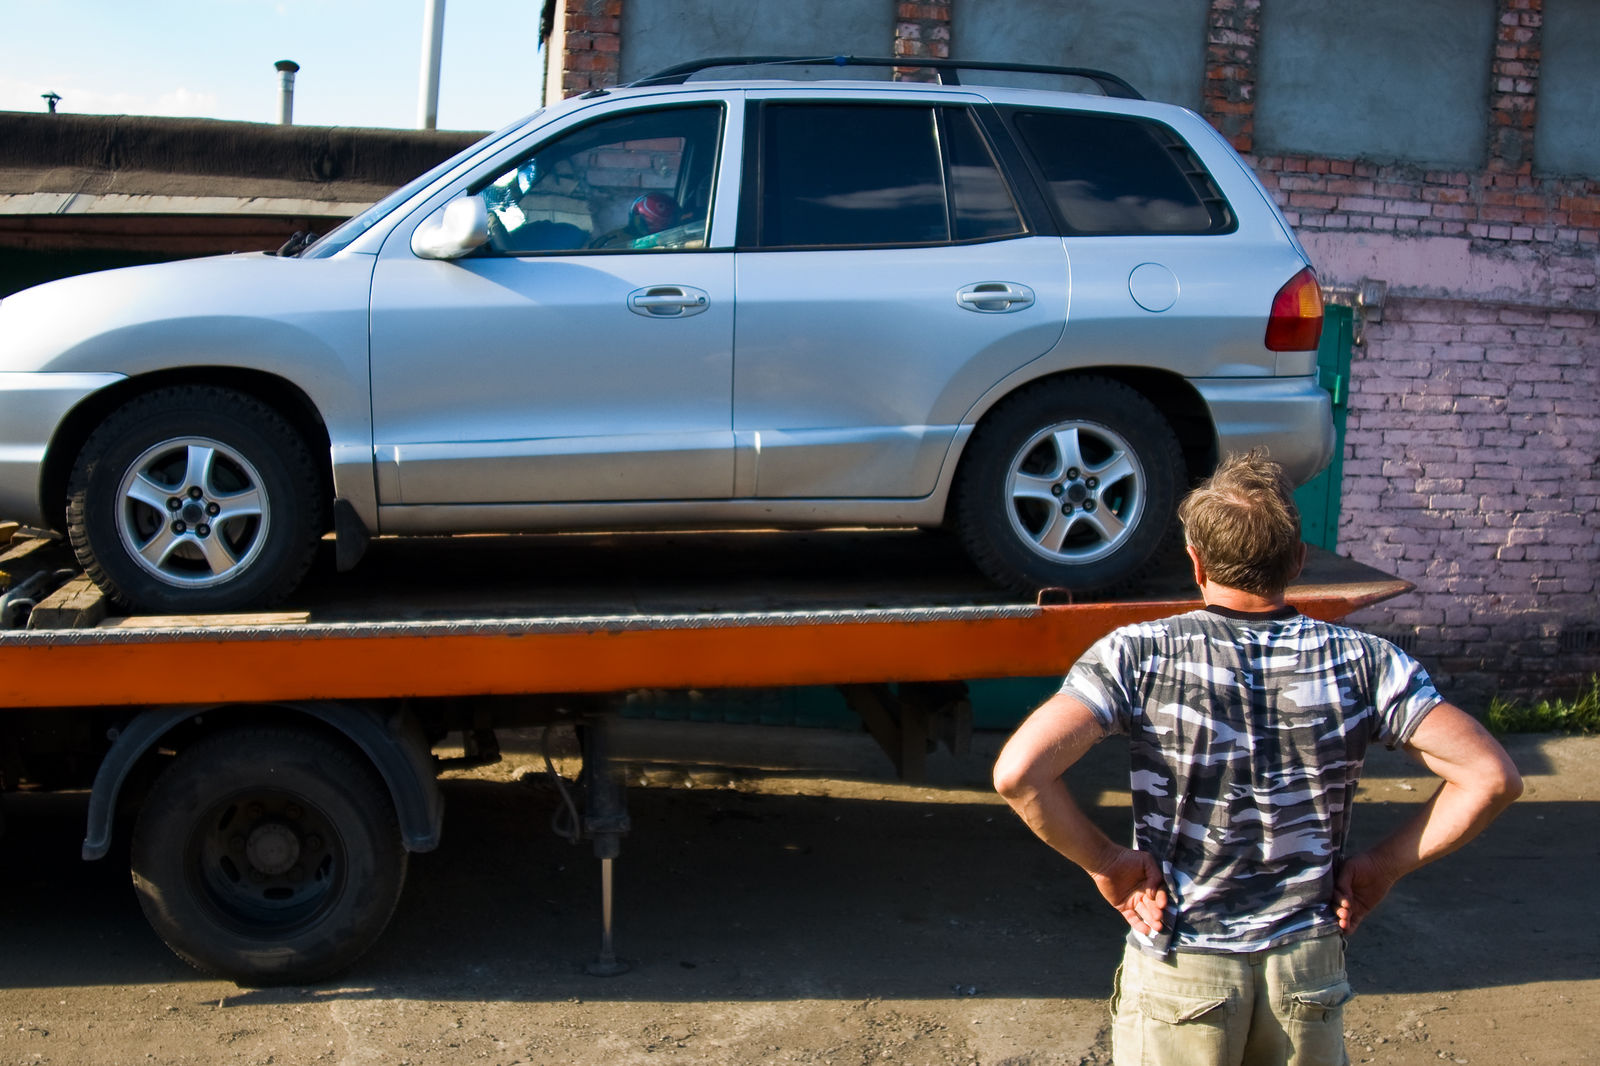 Can the police impound your car for no insurance?